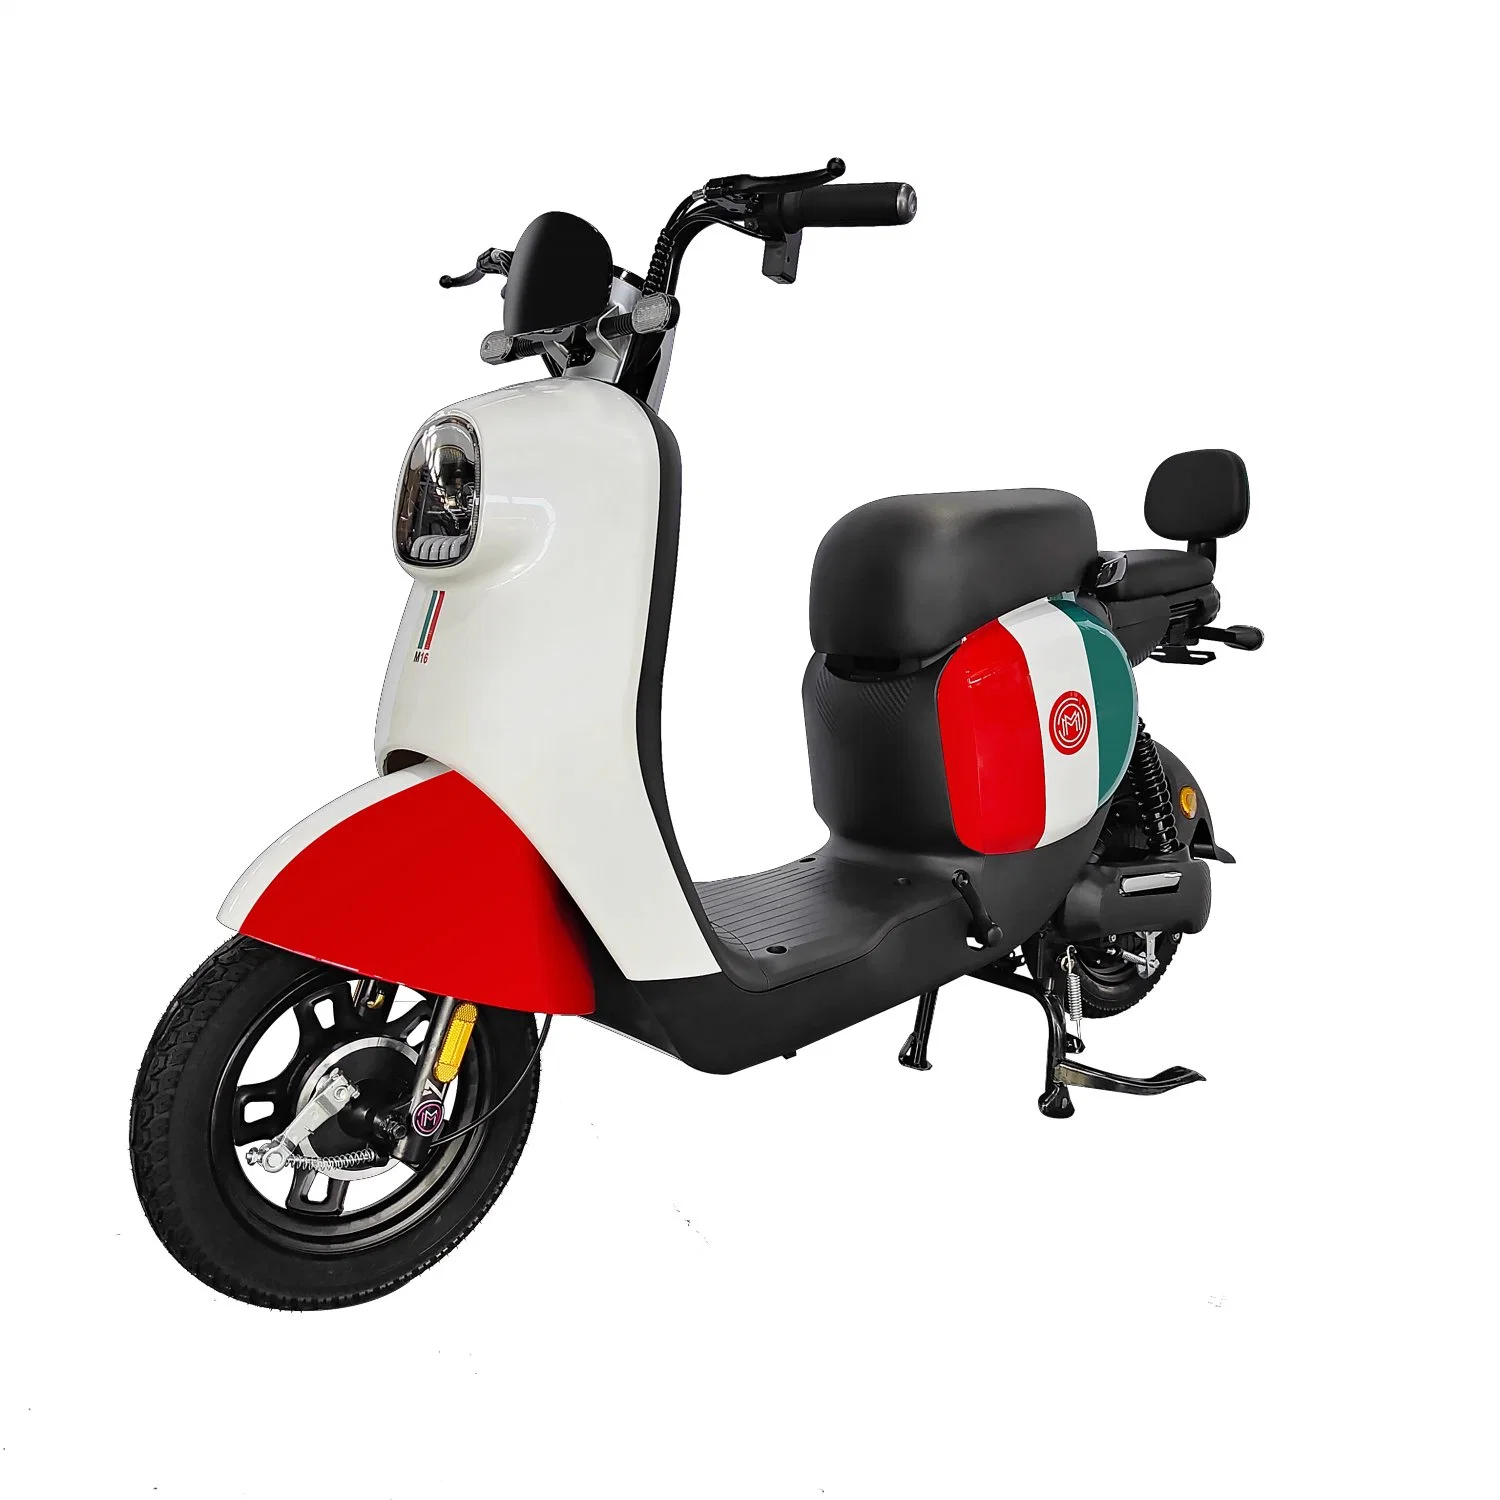 Willstar Ty258 High-Power Electric Moped/Electric Bicycle with 48V20ah Chilwee Lead-Acid Battery